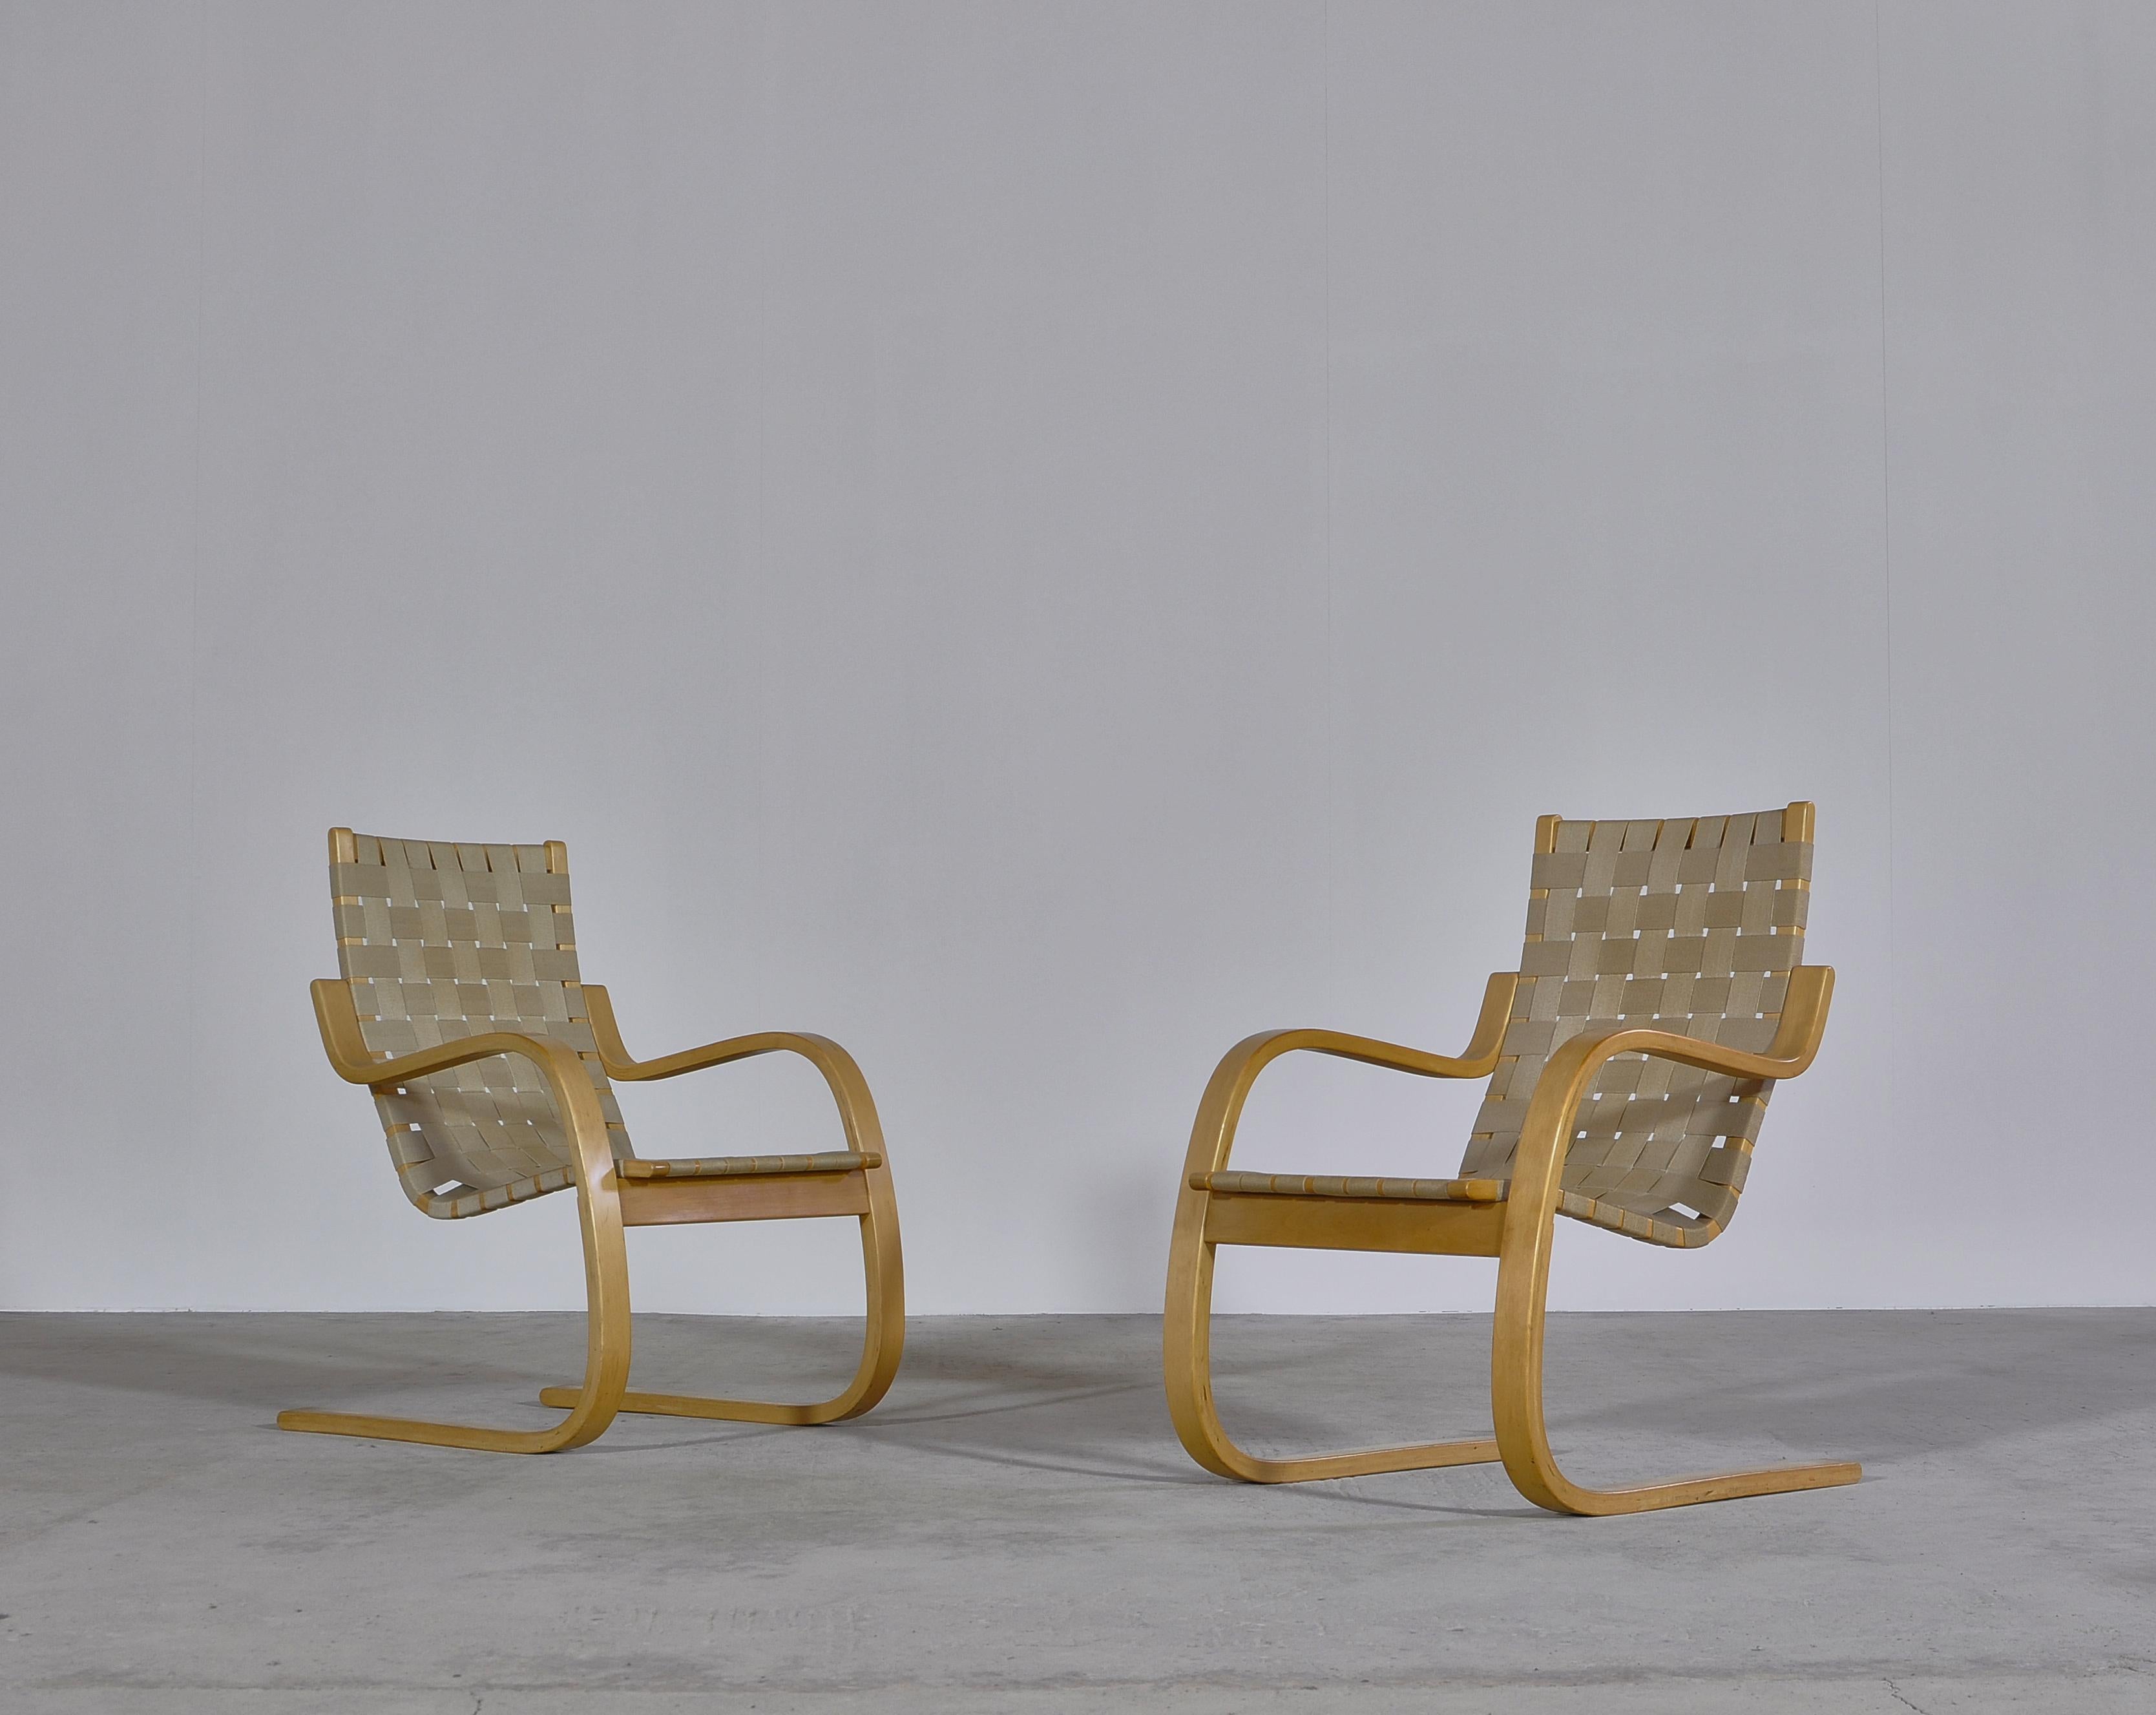 Early pair of Alvar Aalto cantilever chairs model 406 Artek, 1960. Beautiful vintage armchairs made from laminated birch. This is an early production by Artek in original condition with a nice patina to the birch and the canvas webbing.